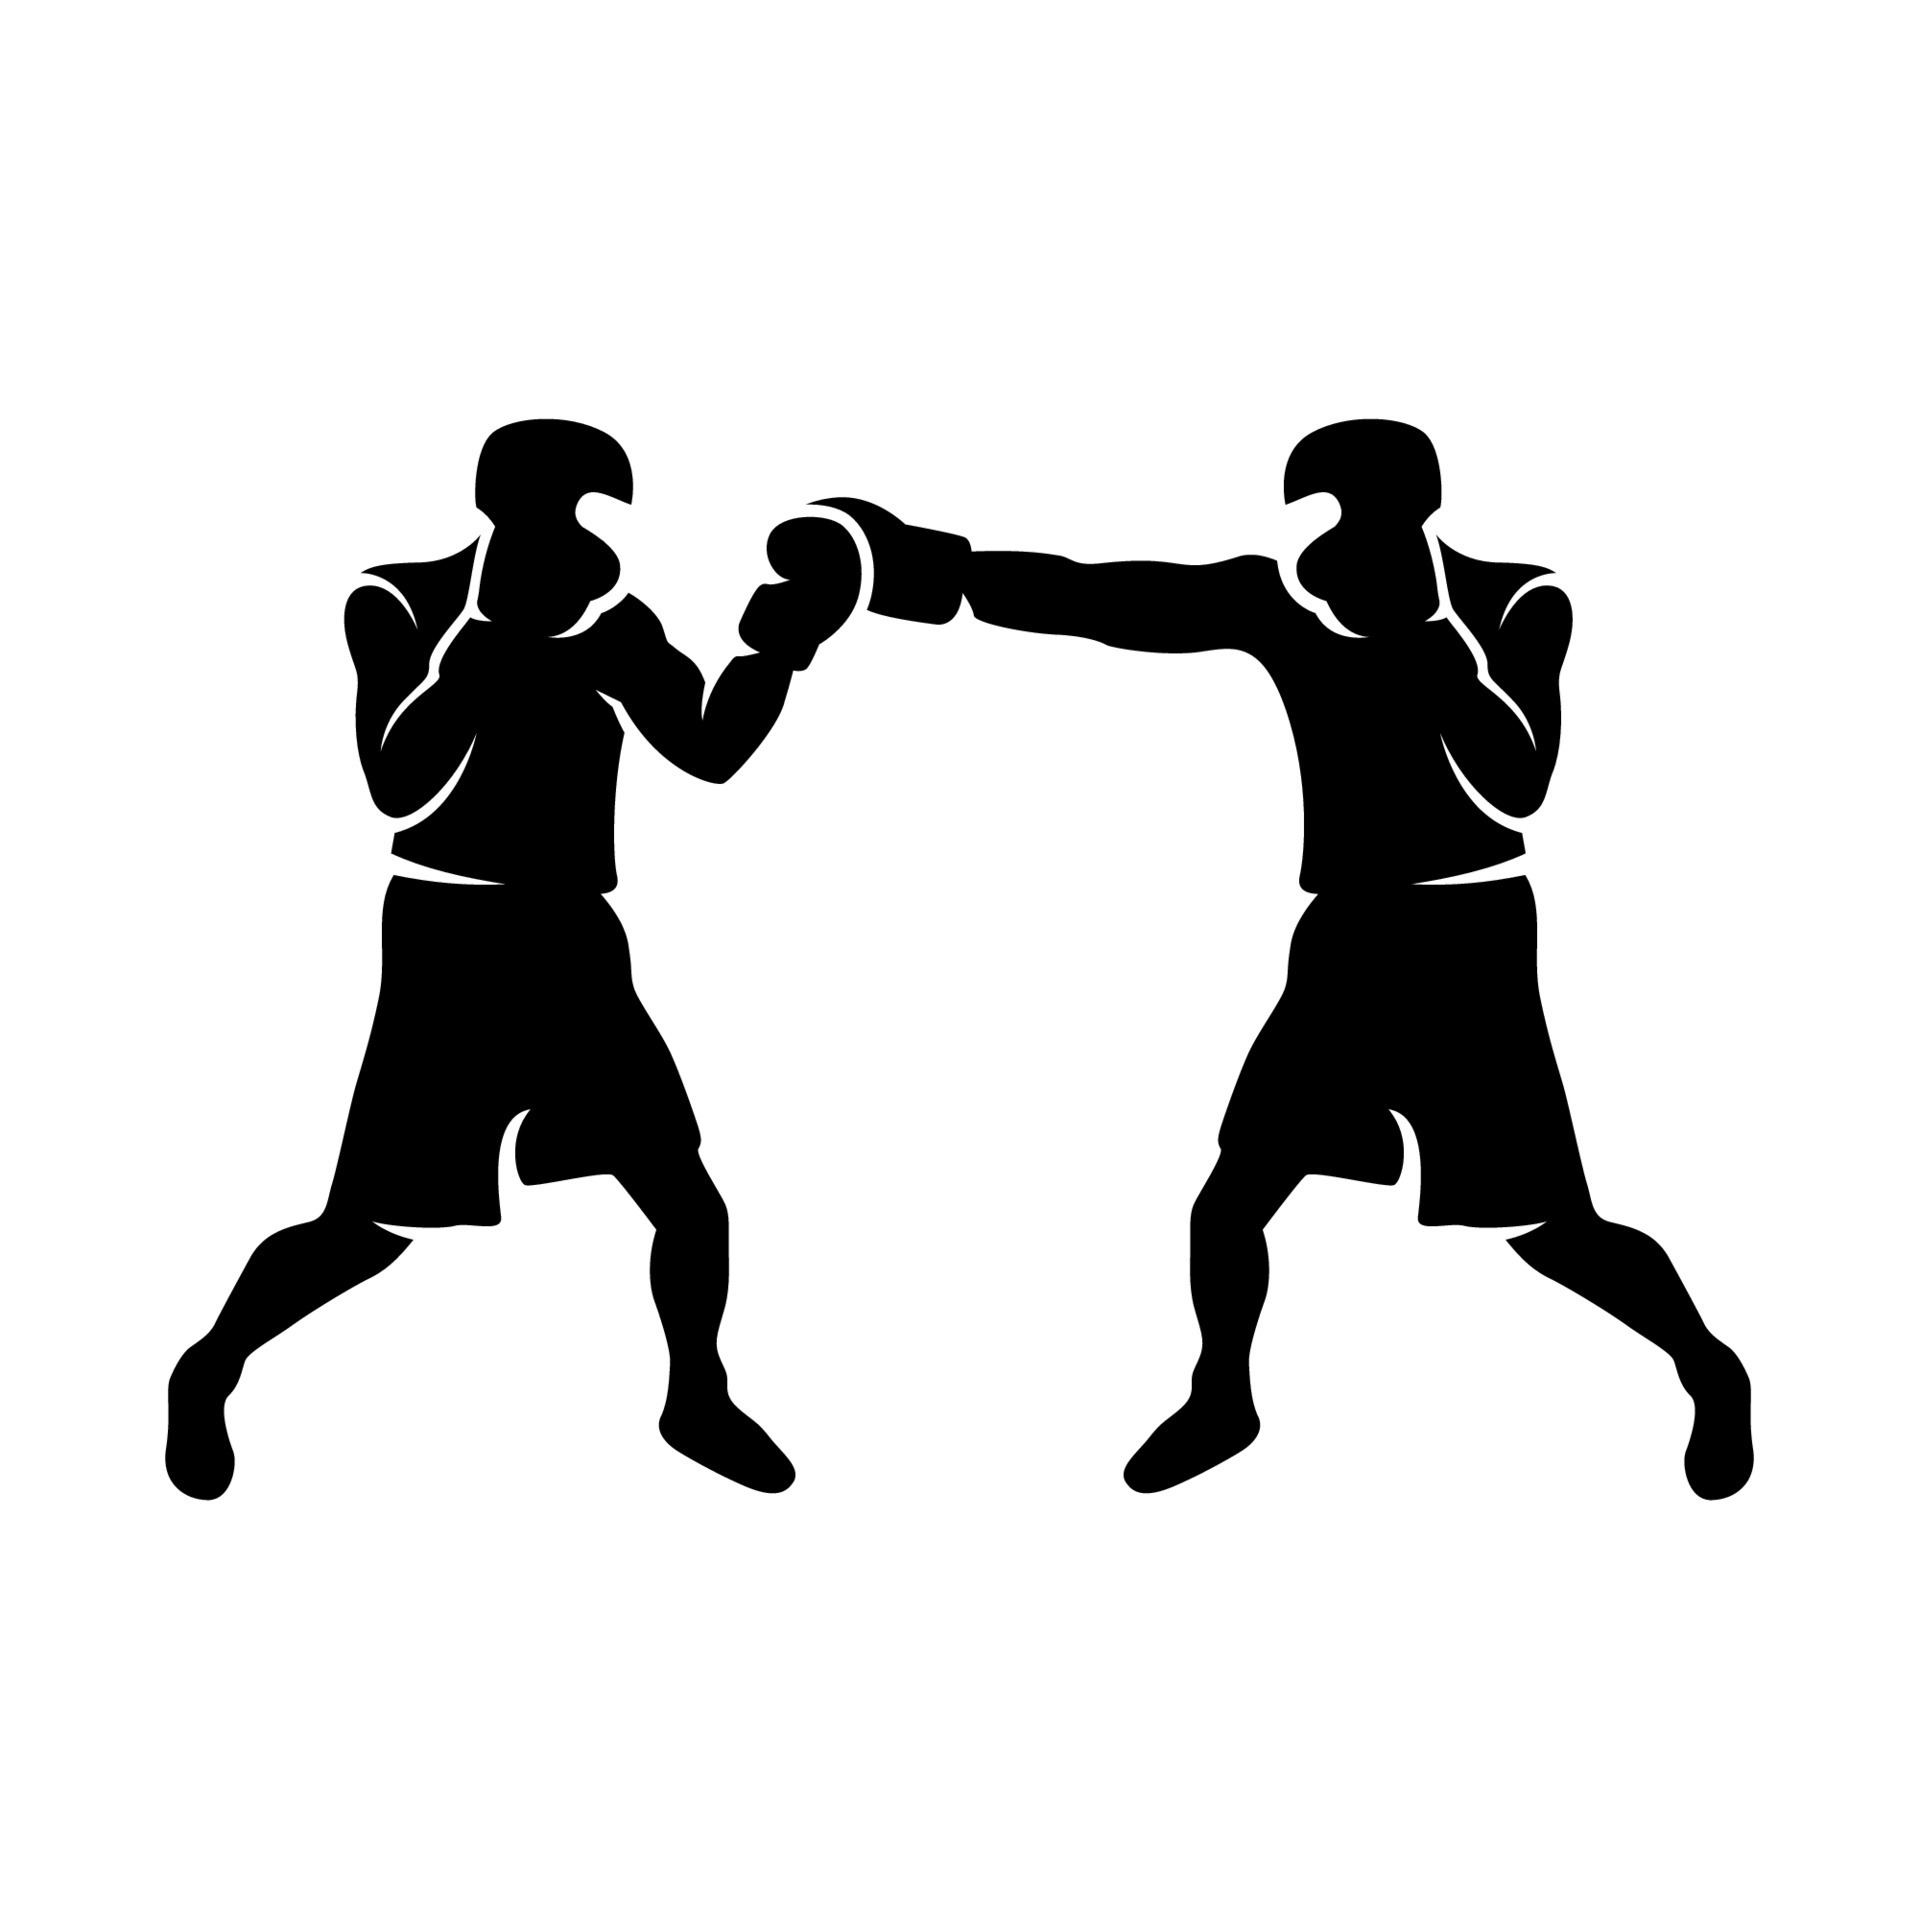 Boxing match vector